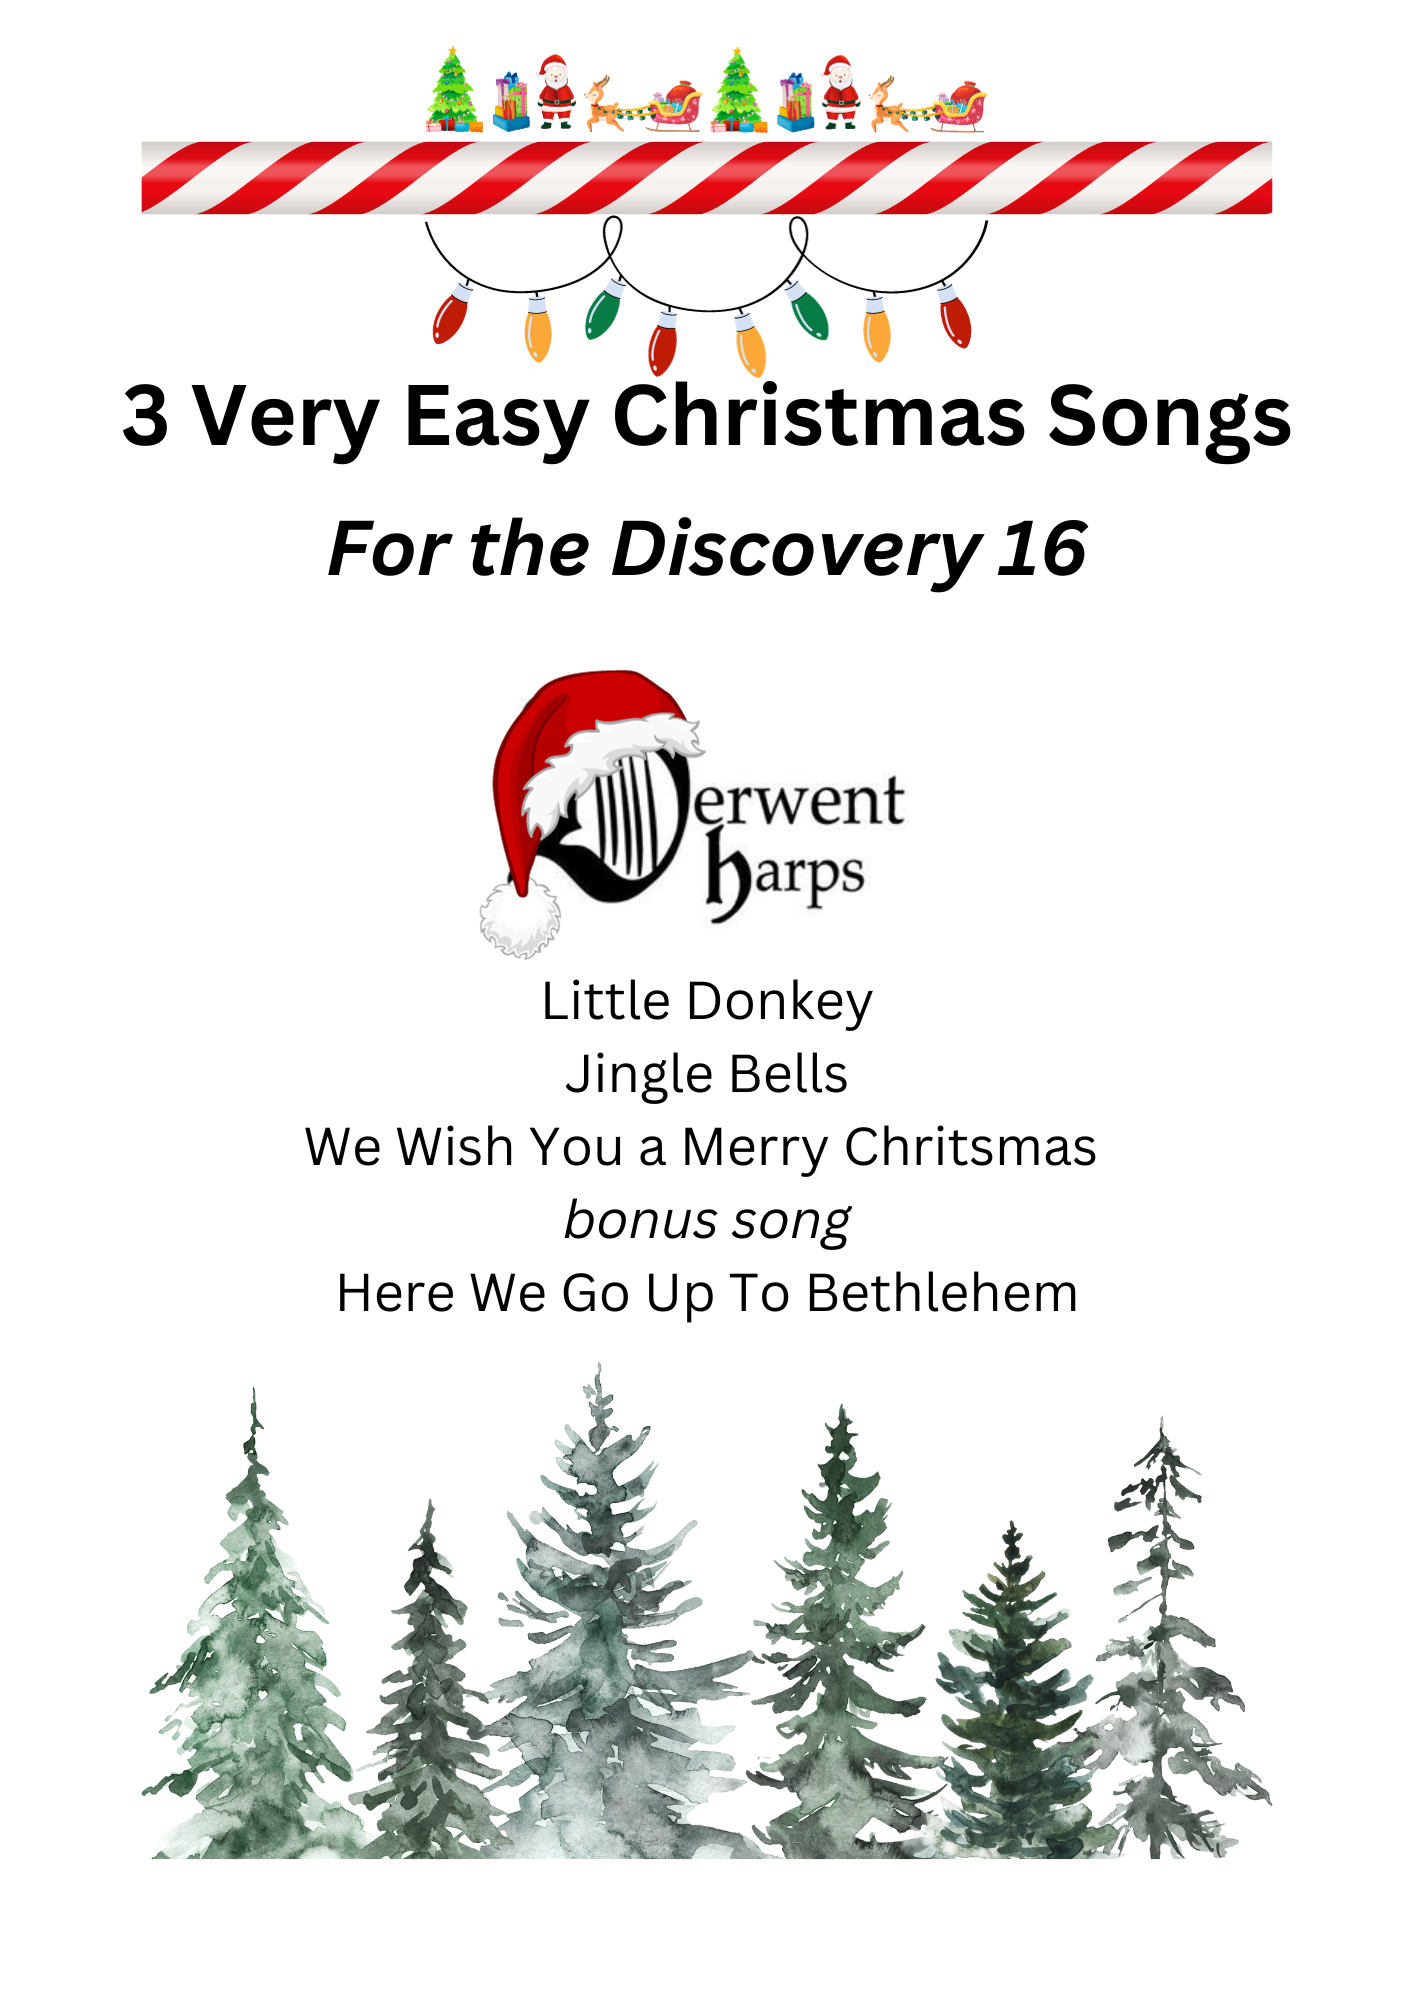 Three Very Easy Christmas Songs for the Discovery 16 £1.99